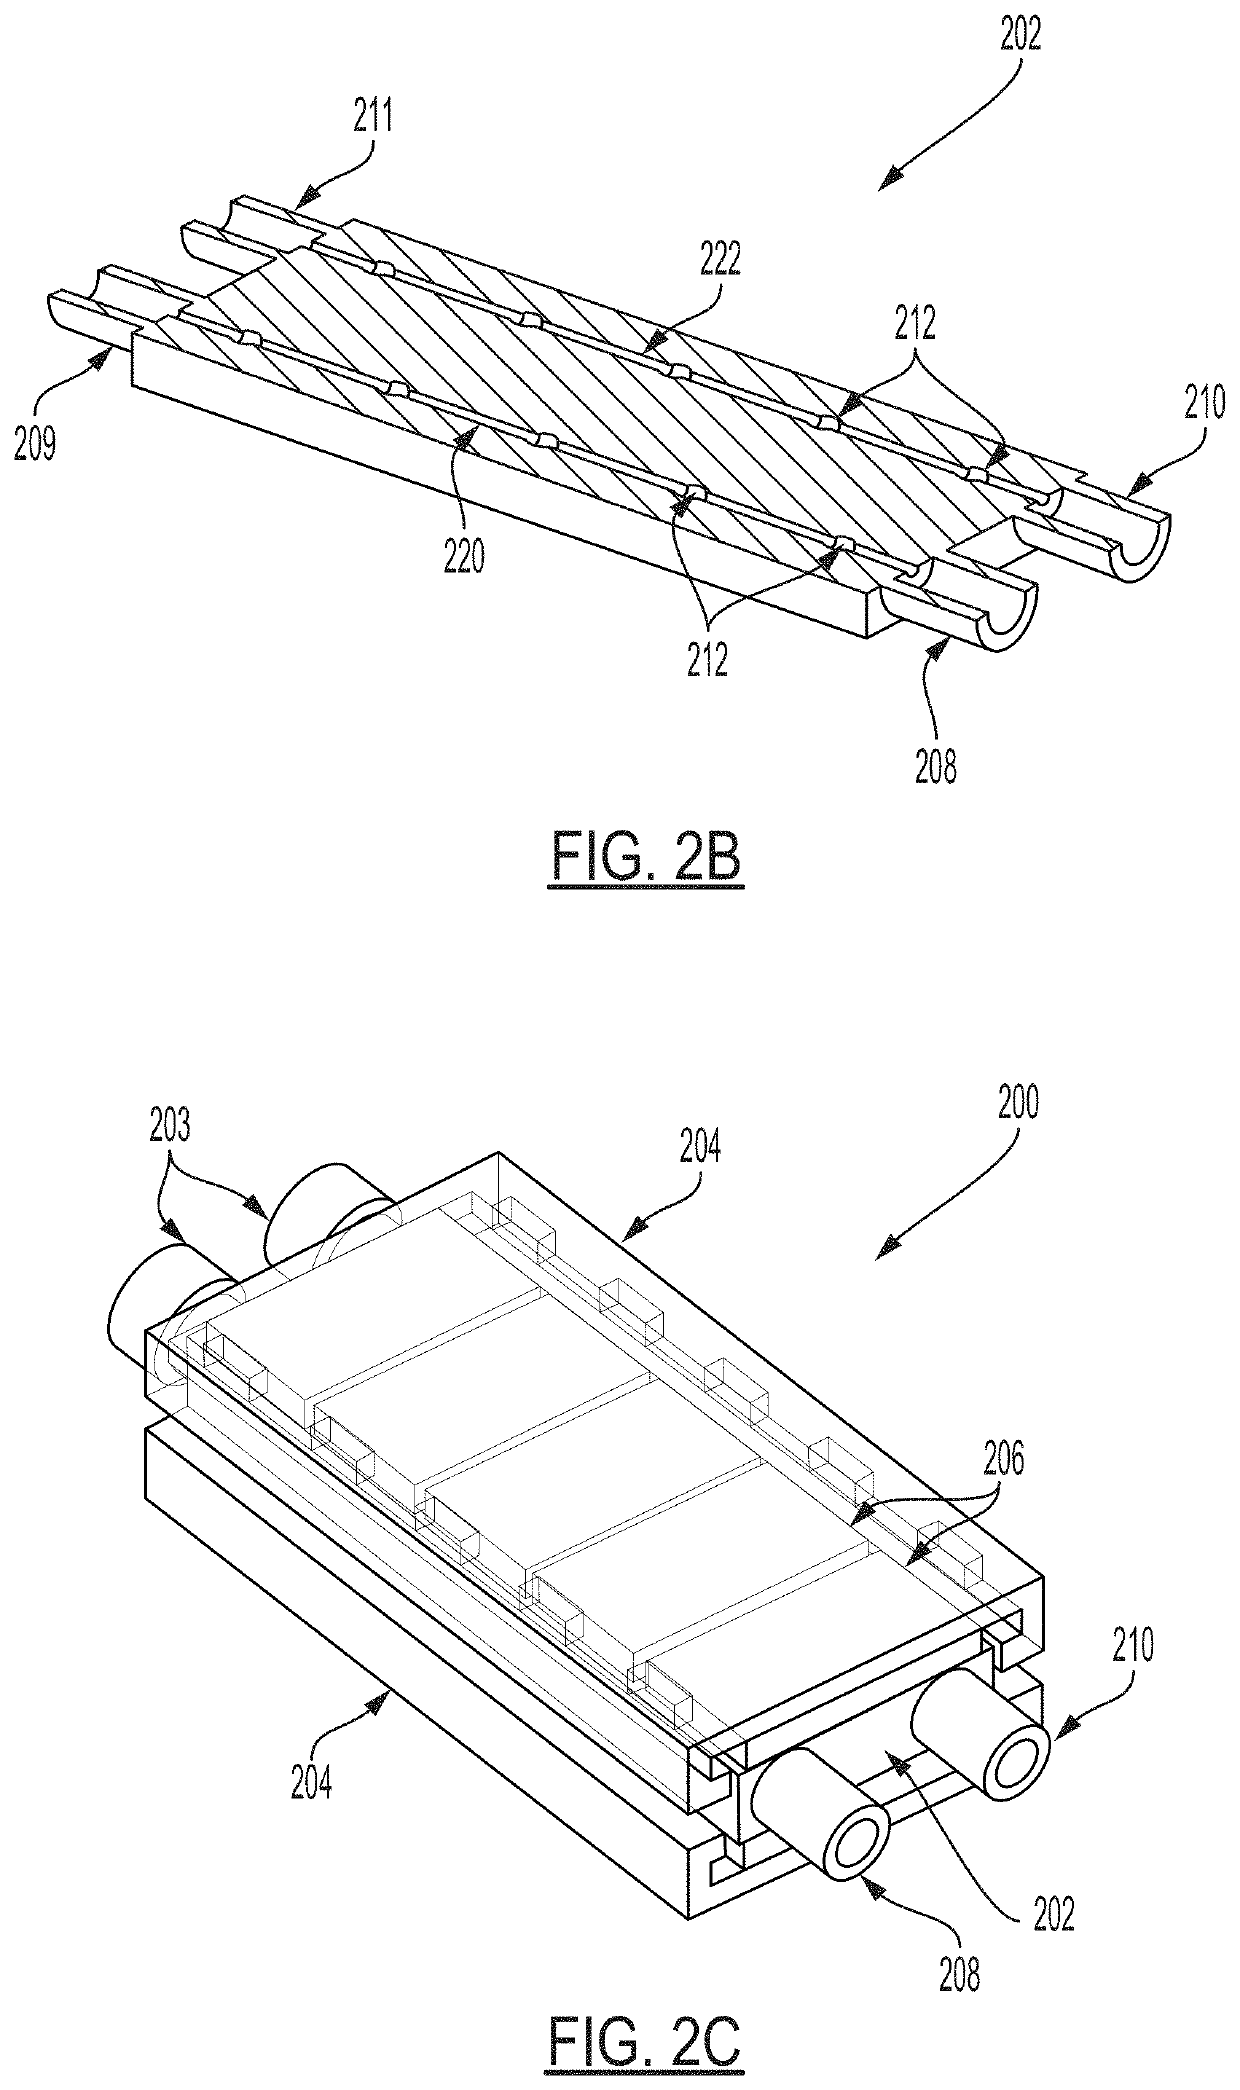 Cartridge for use in a system for delivery of a payload into a cell